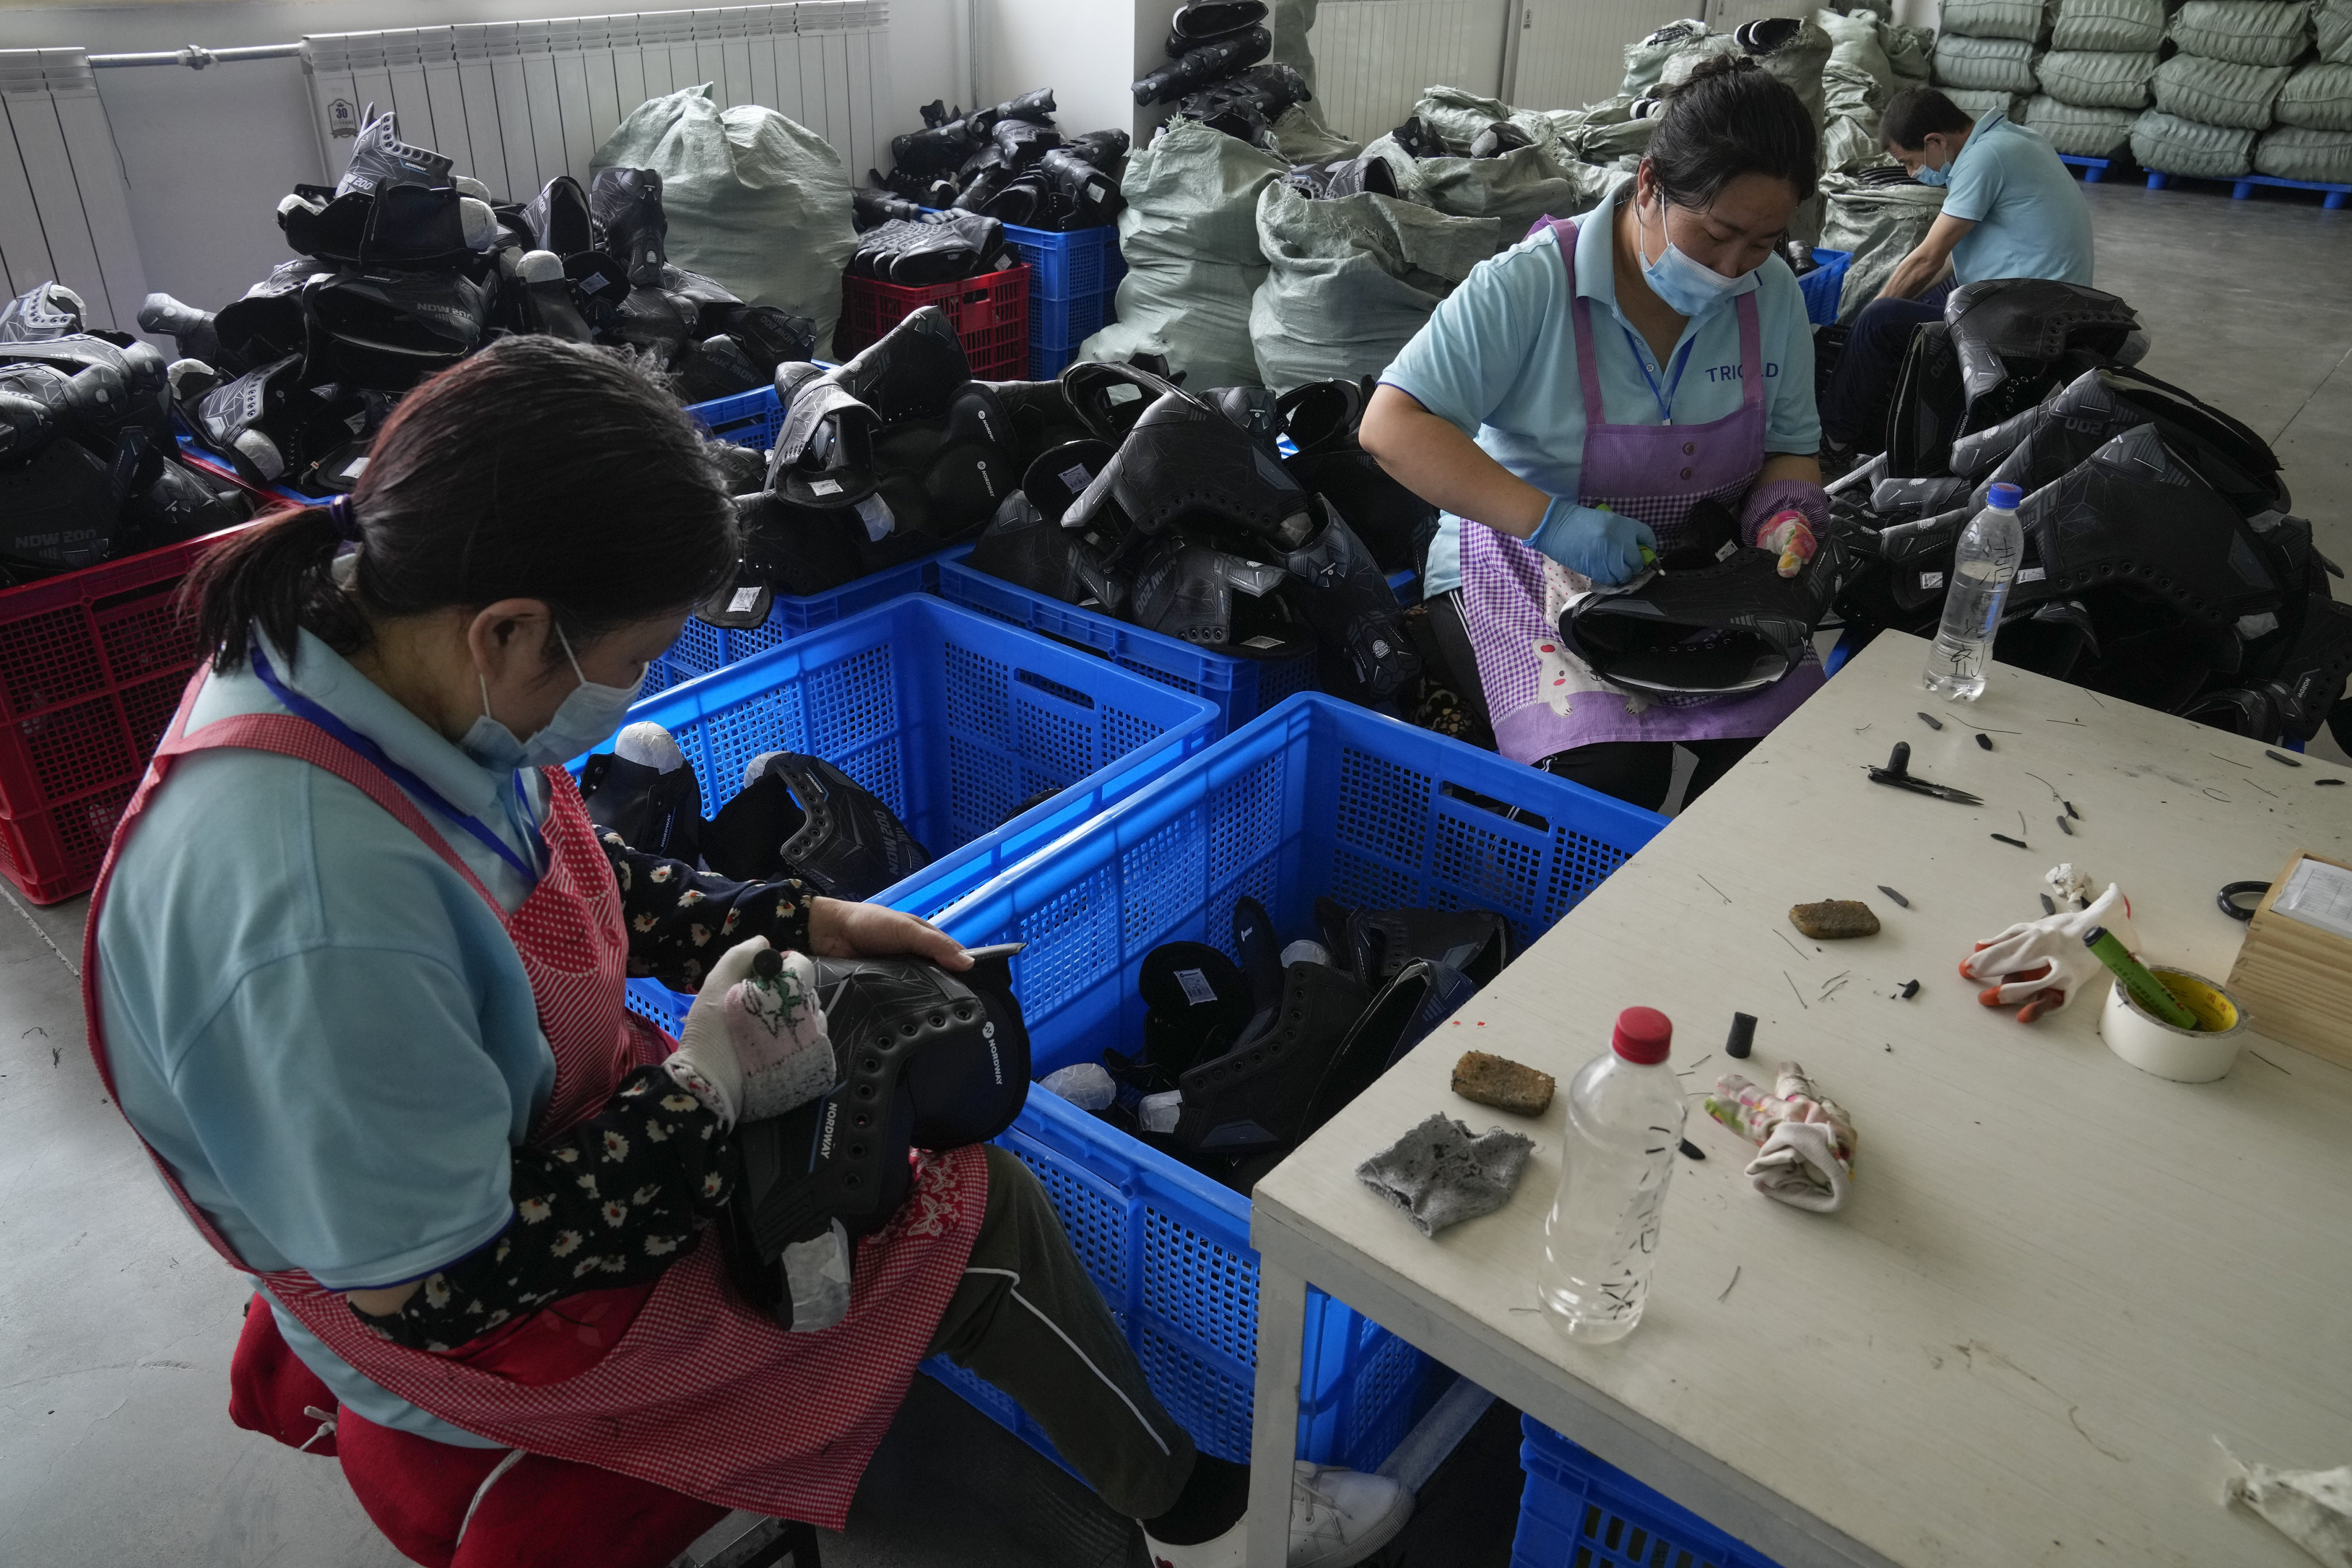 Workers assemble ice skates at a factory in Zhangjiakou, in northwestern China’s Hebei province, on July 15. China’s retail sales and industrial production growth weakened in July as floods and Covid-19 outbreaks disrupted consumption and supply chains. Photo: AP